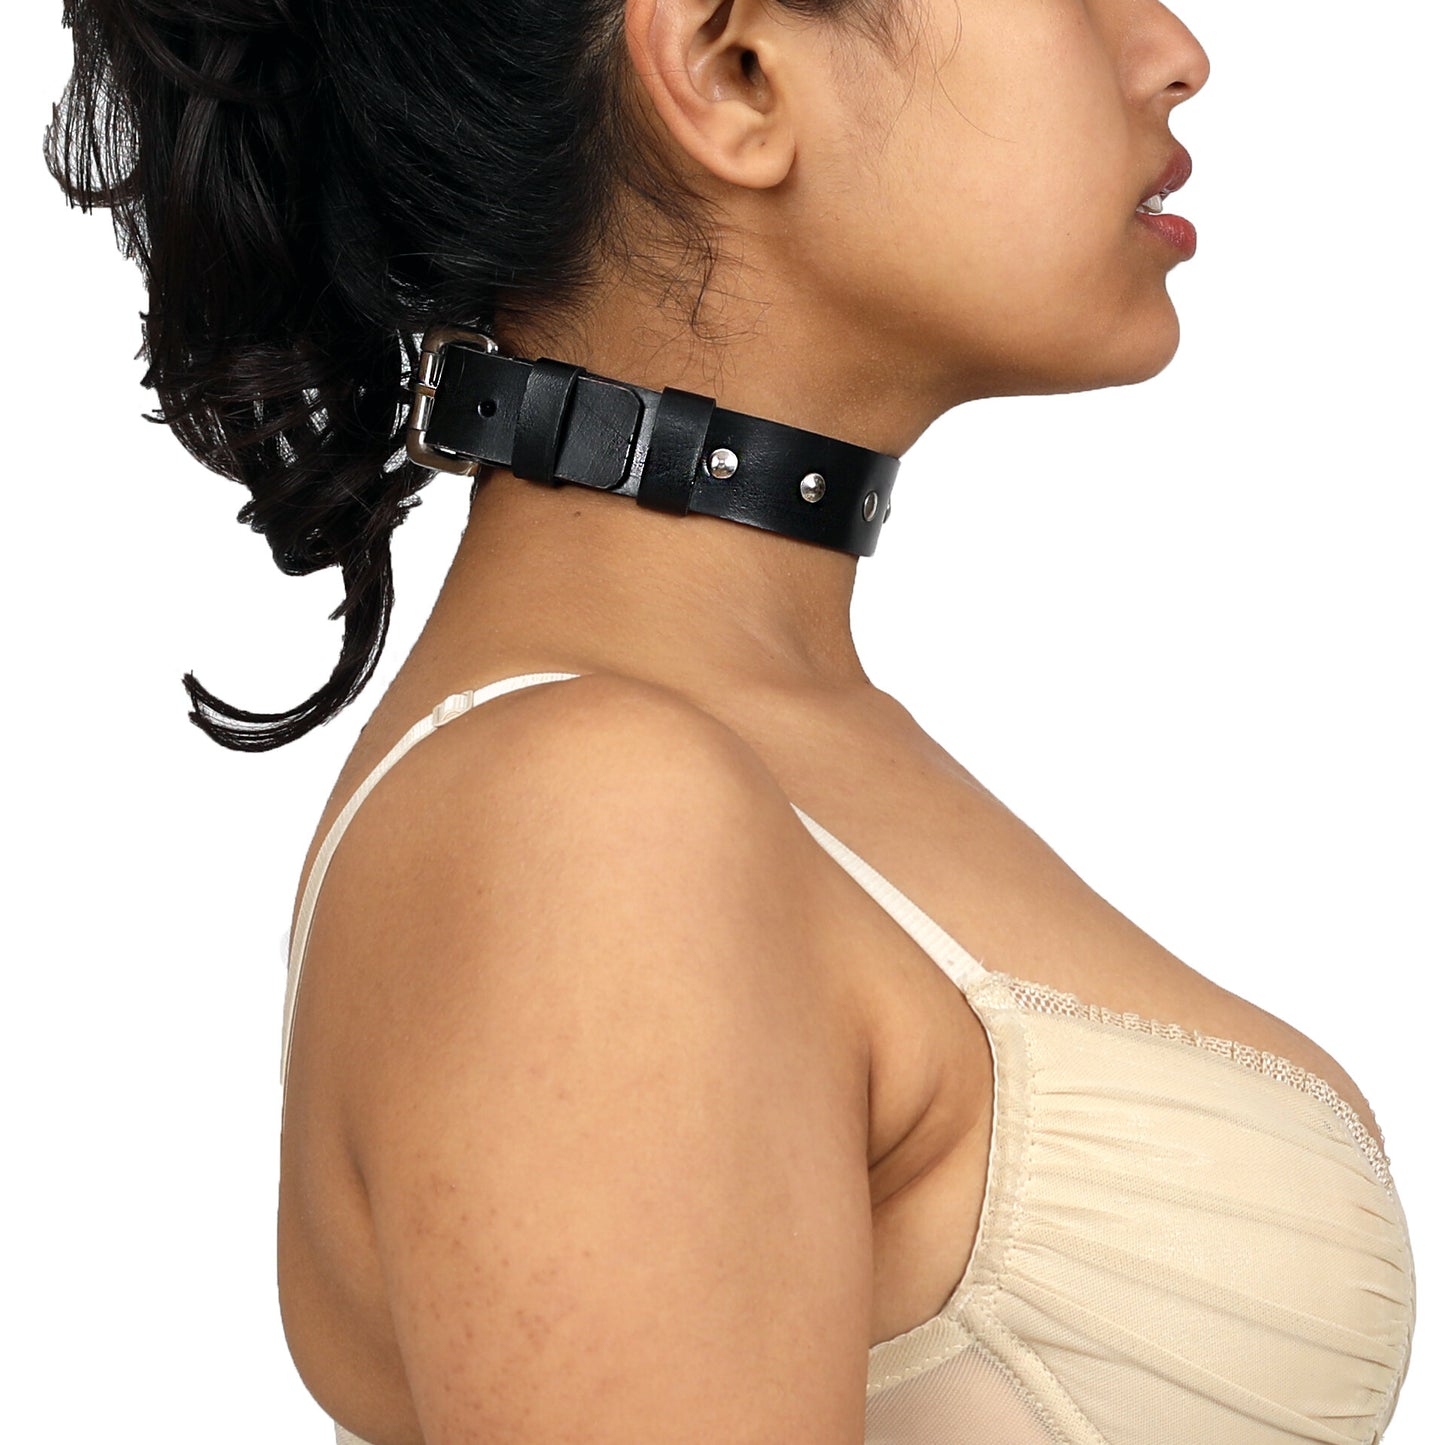 CLASSIC SUBMISSIVE CHOKER - Subculture